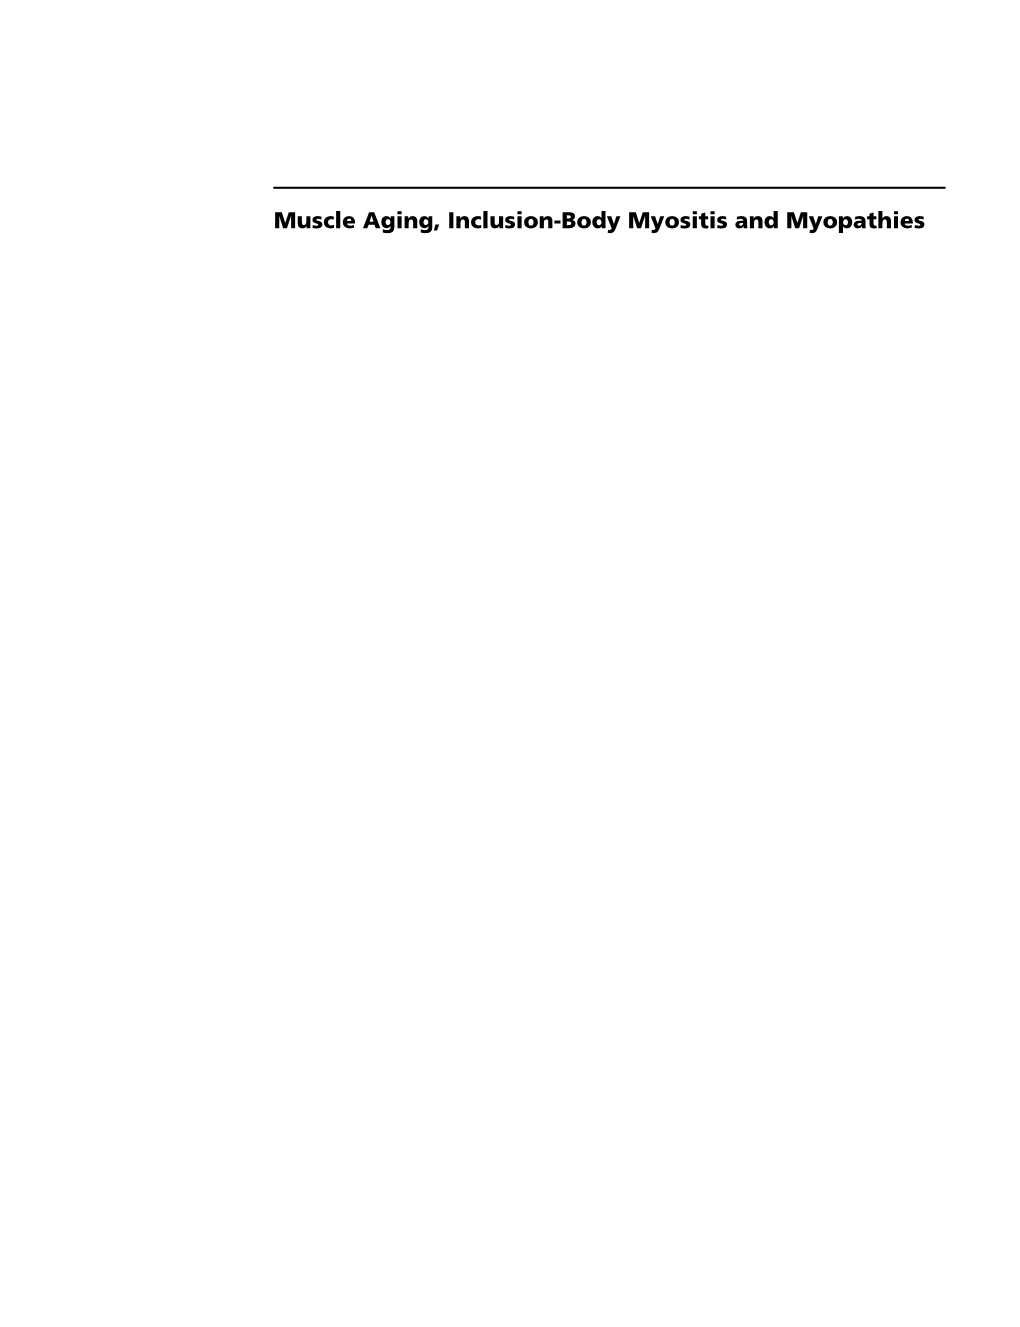 Muscle Aging, Inclusion-Body Myositis and Myopathies Muscle Aging, Inclusion-Body Myositis and Myopathies